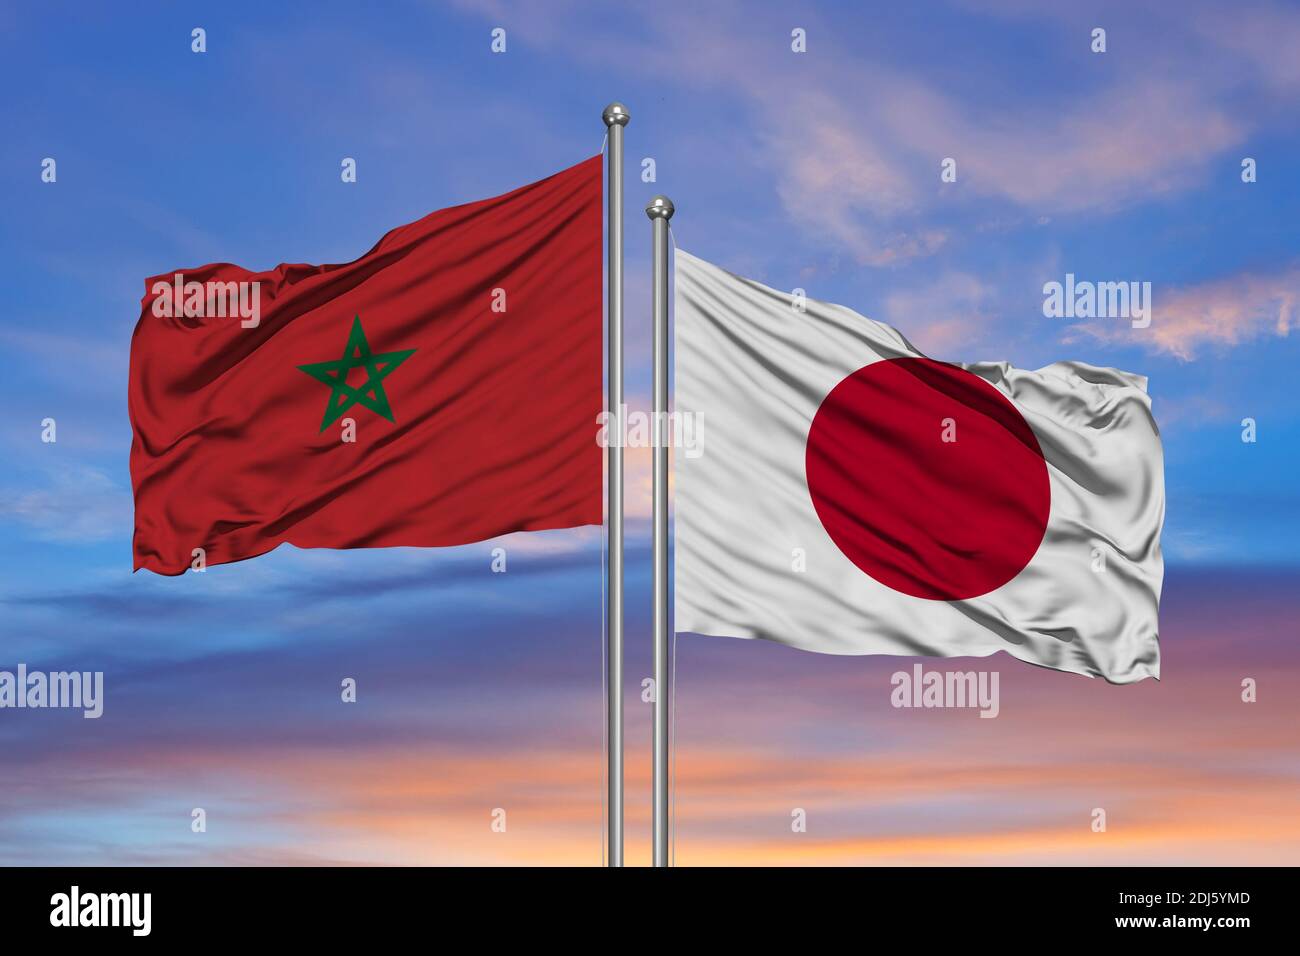 The flags of Morocco and Japan waving together in the blue sky Stock Photo